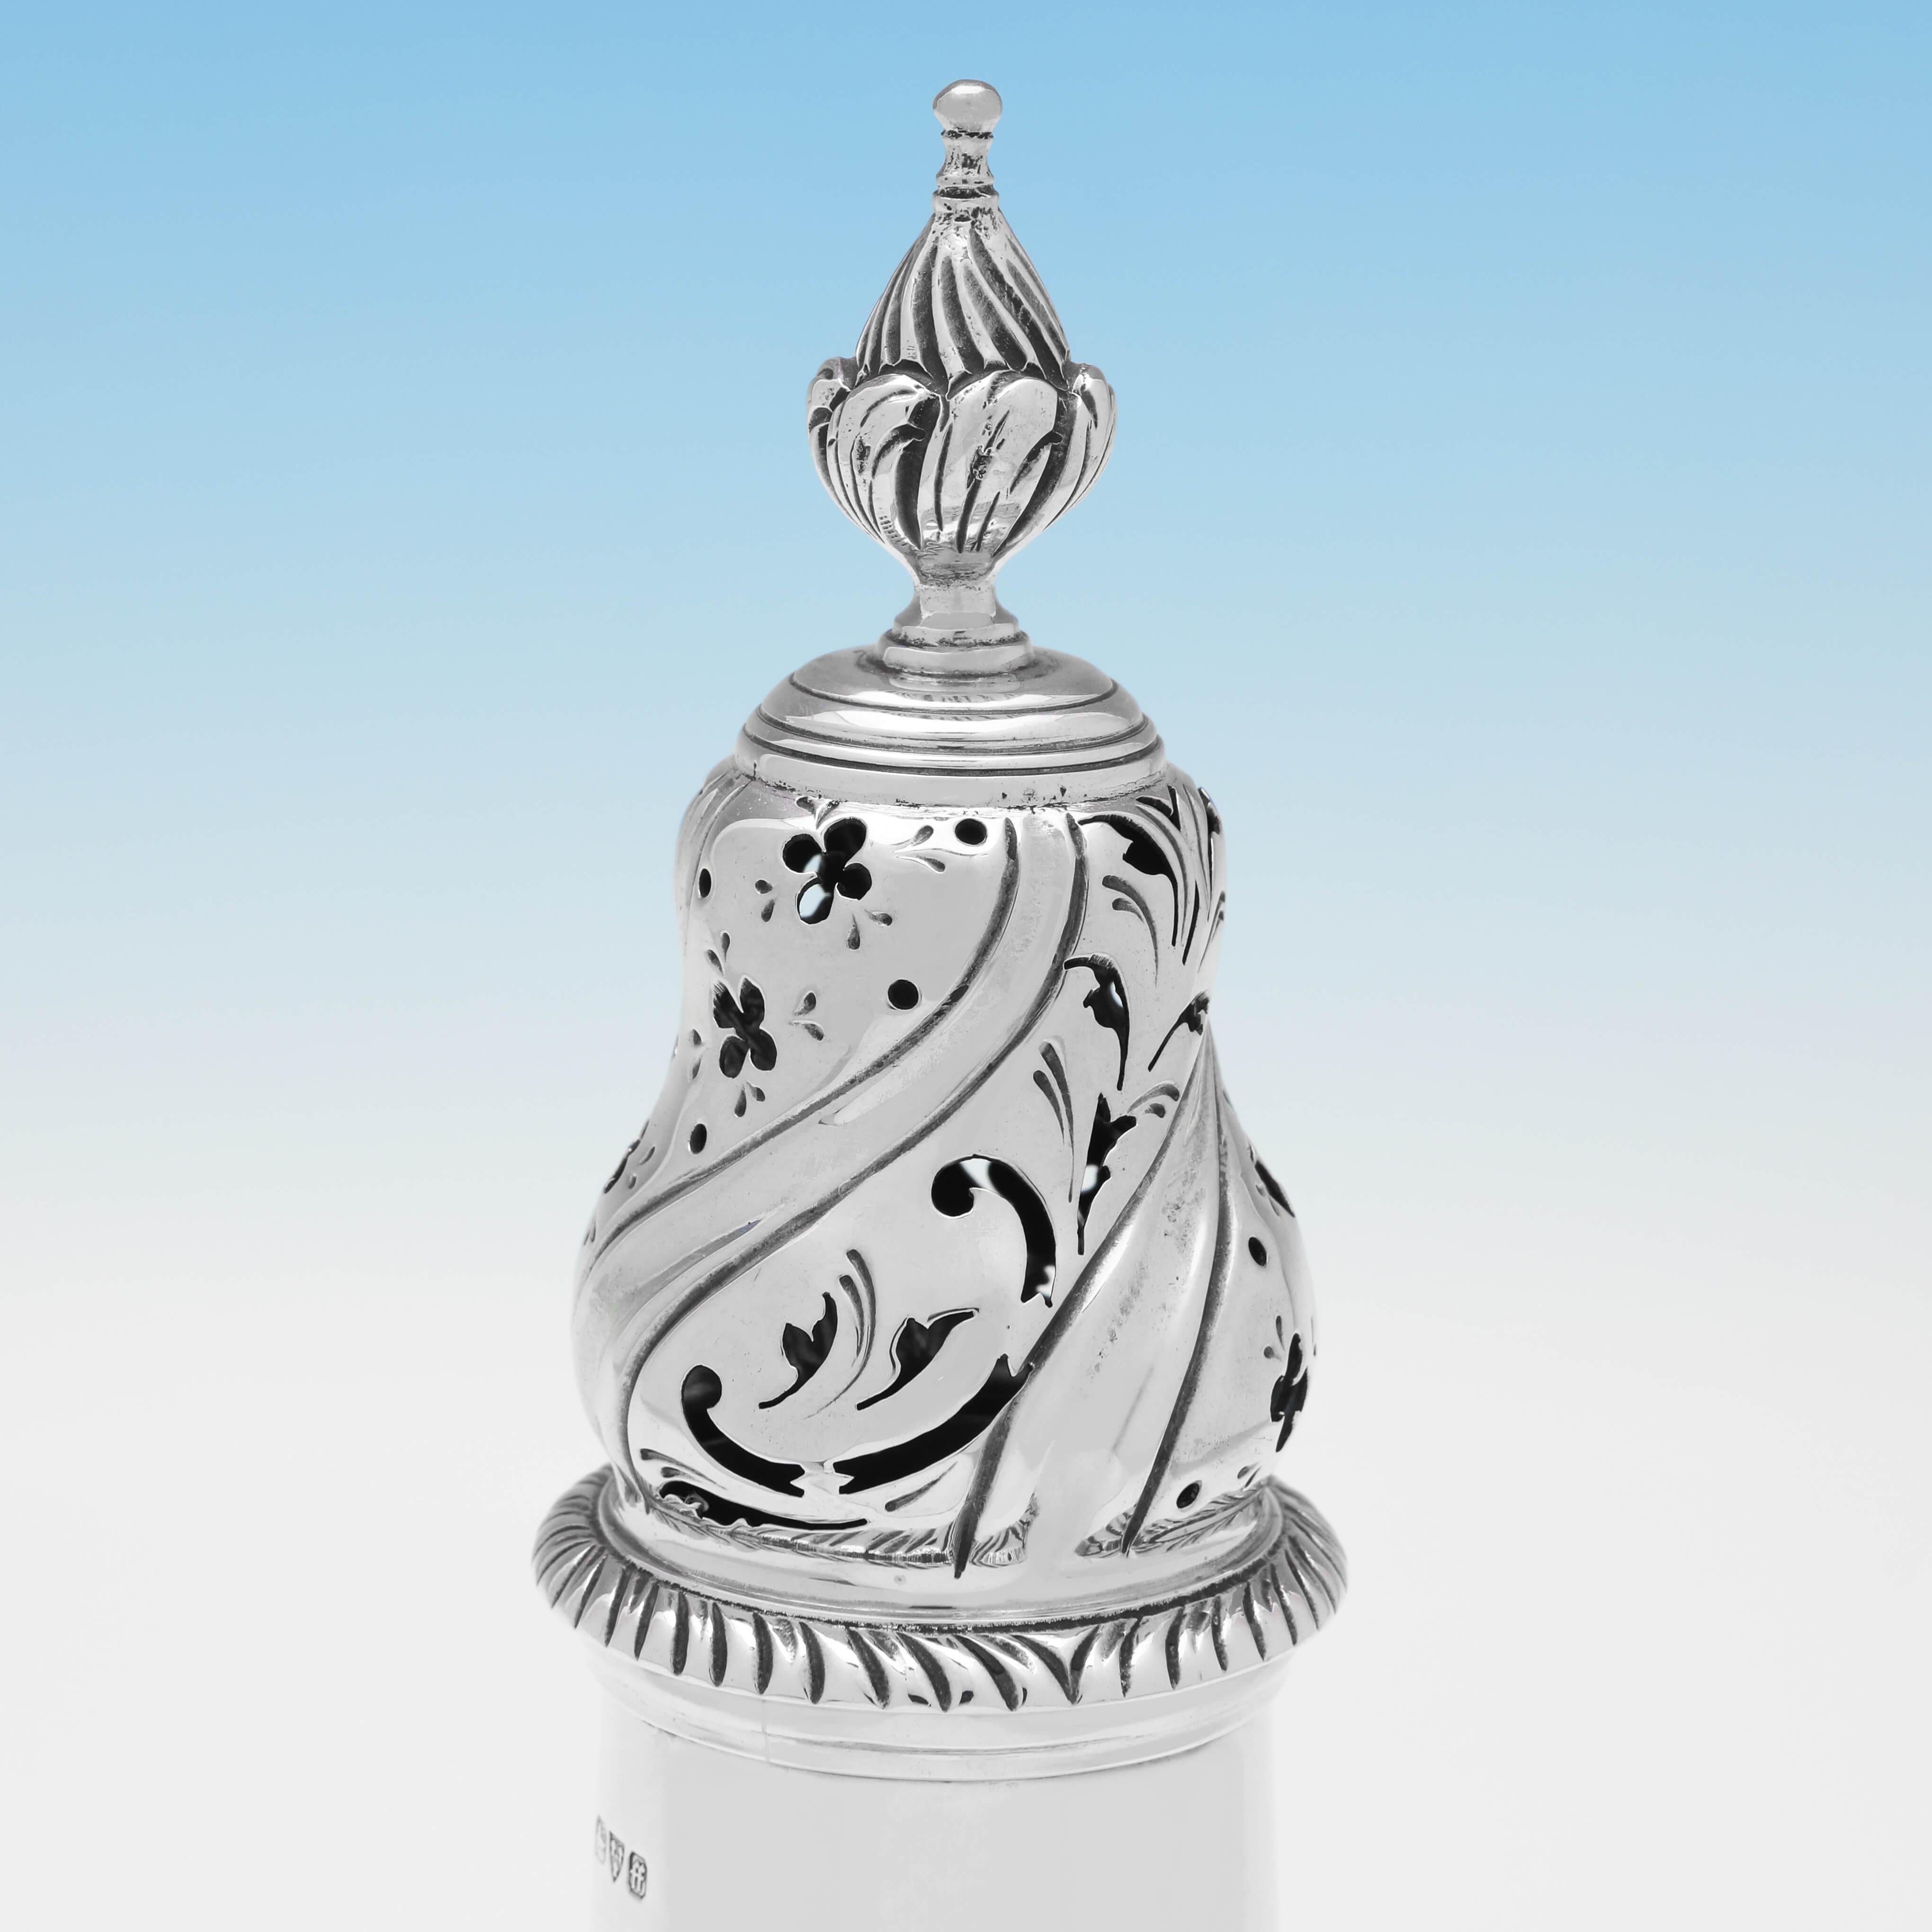 Hallmarked in Chester in 1931 by Jay, Richard Attenborough & Co. Ltd., this charming, Sterling Silver Sugar Caster, is of traditional form, and features gadroon borders and a pull of lid. 

The sugar caster measures 9